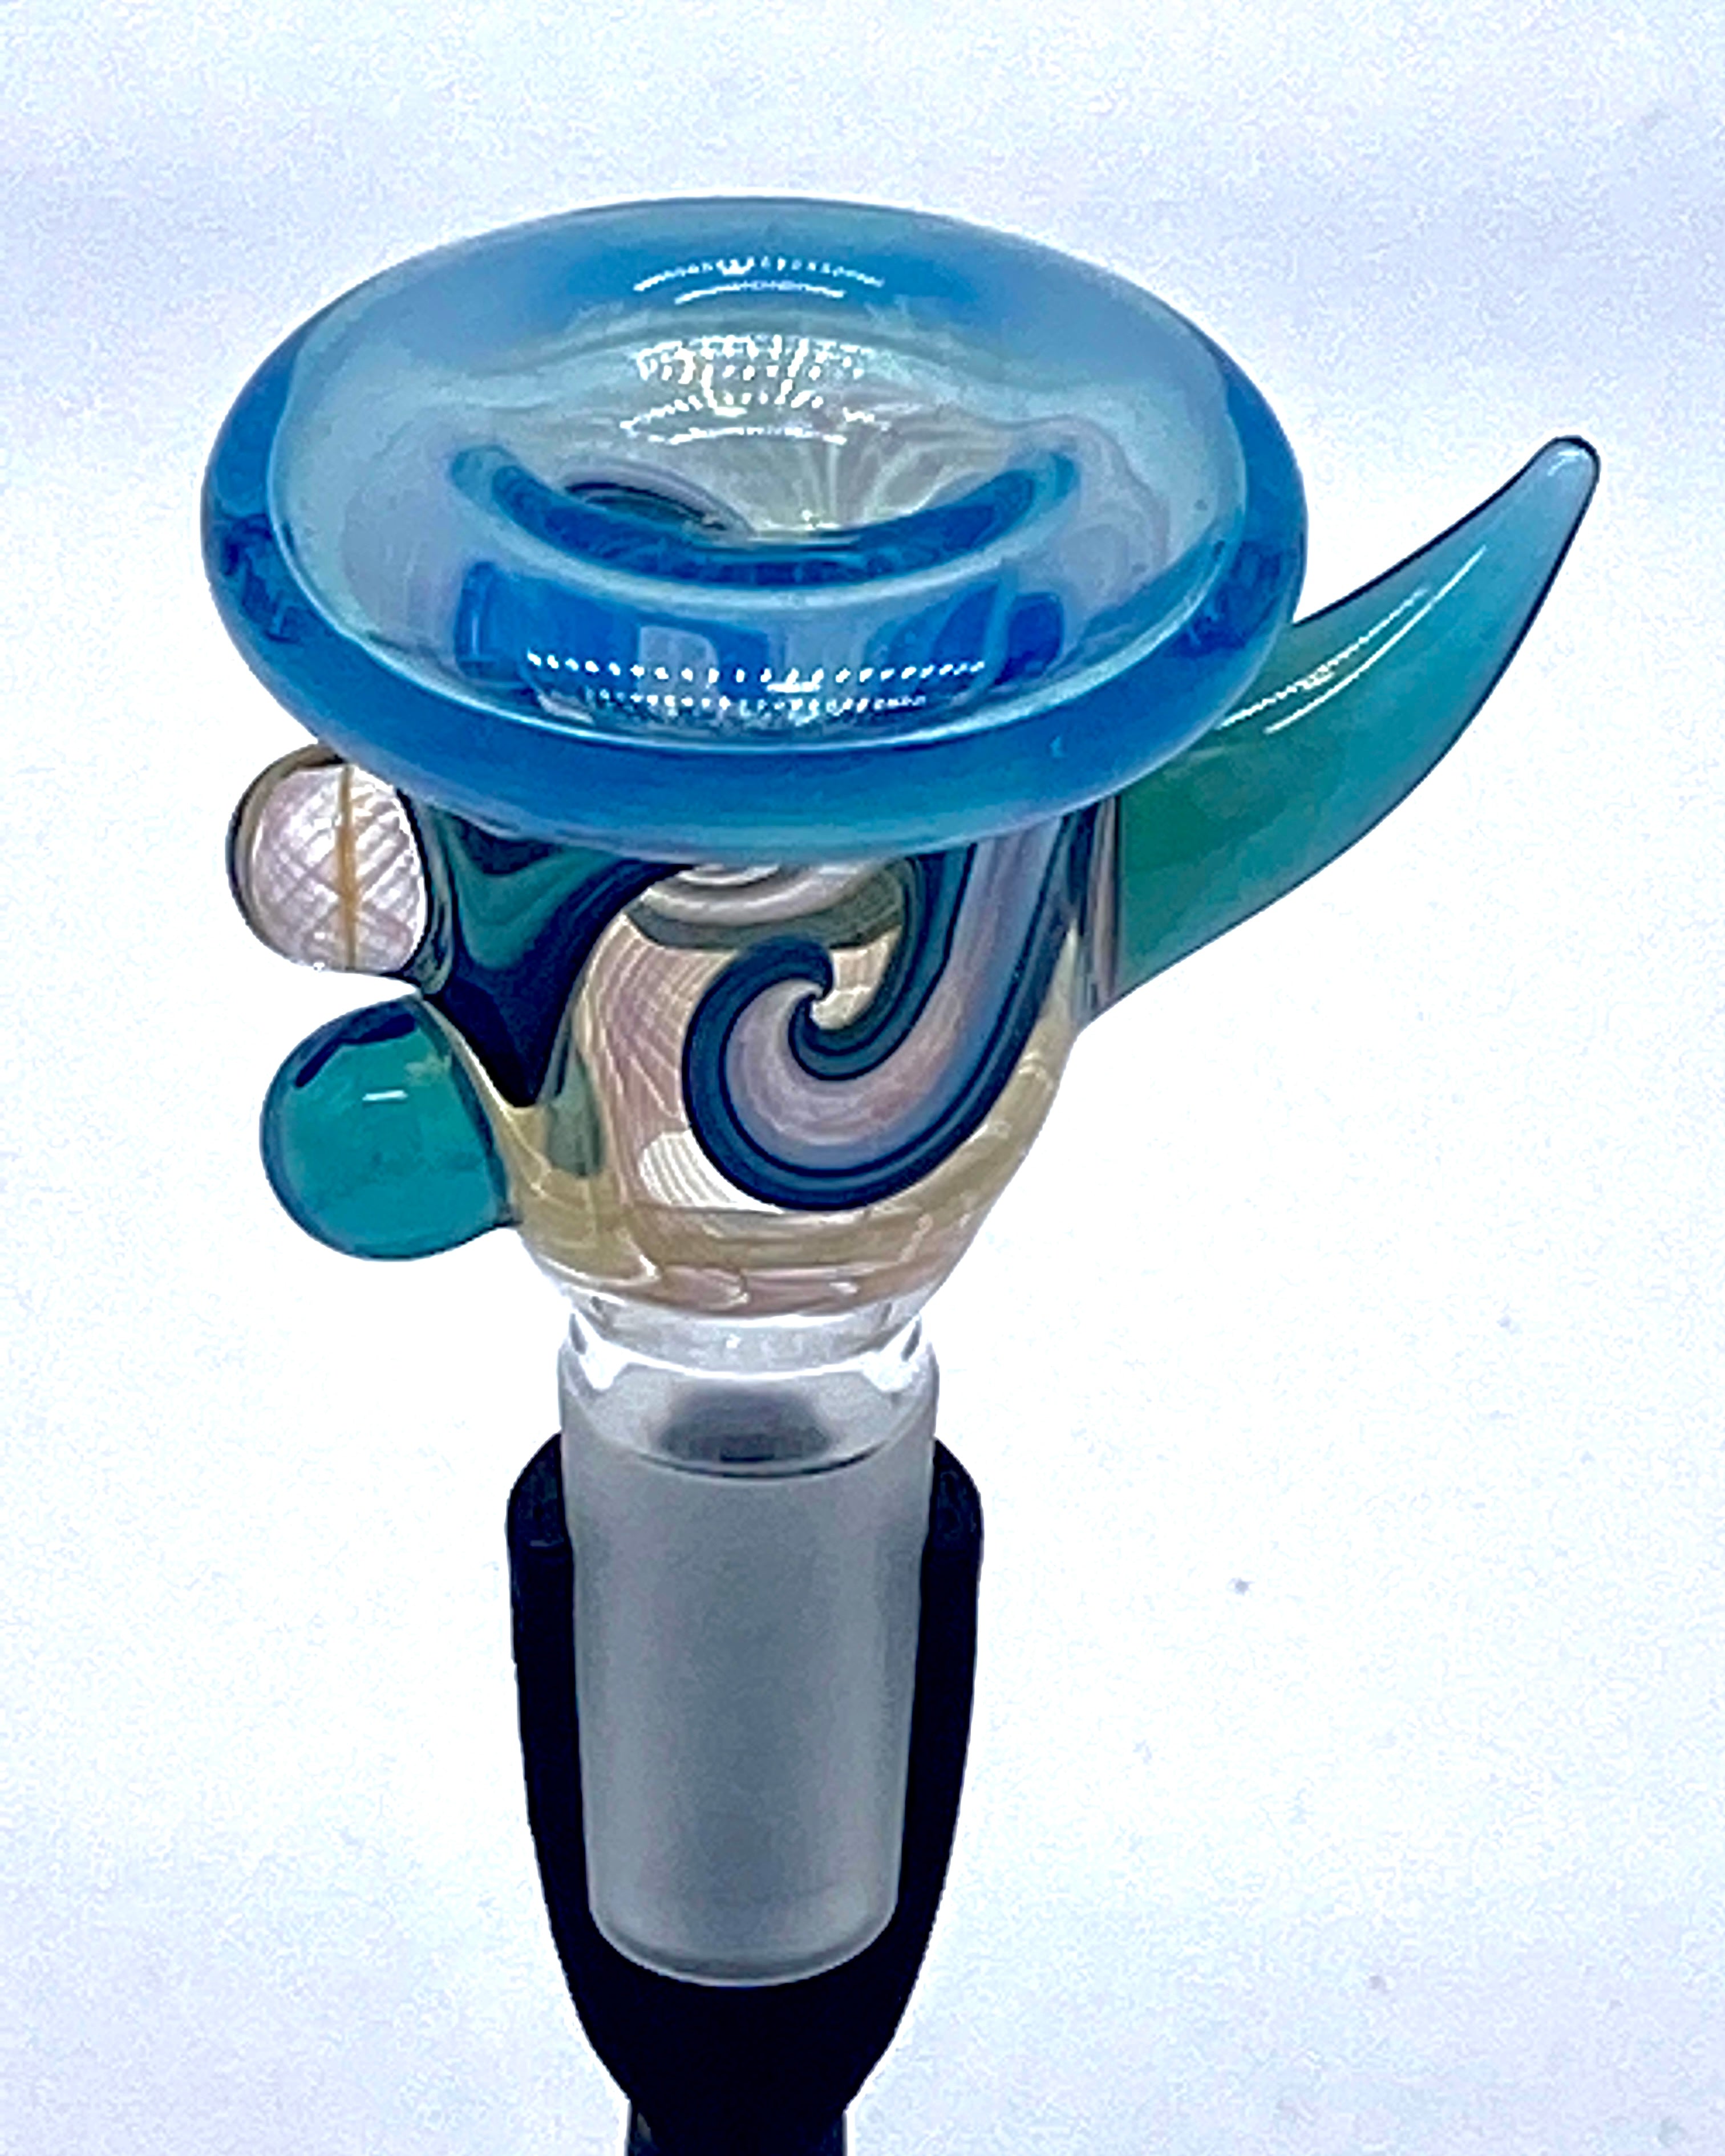 Gasp One Blue & Fumed 14mm Single Hole Slide - TheSmokeyMcPotz Collection 